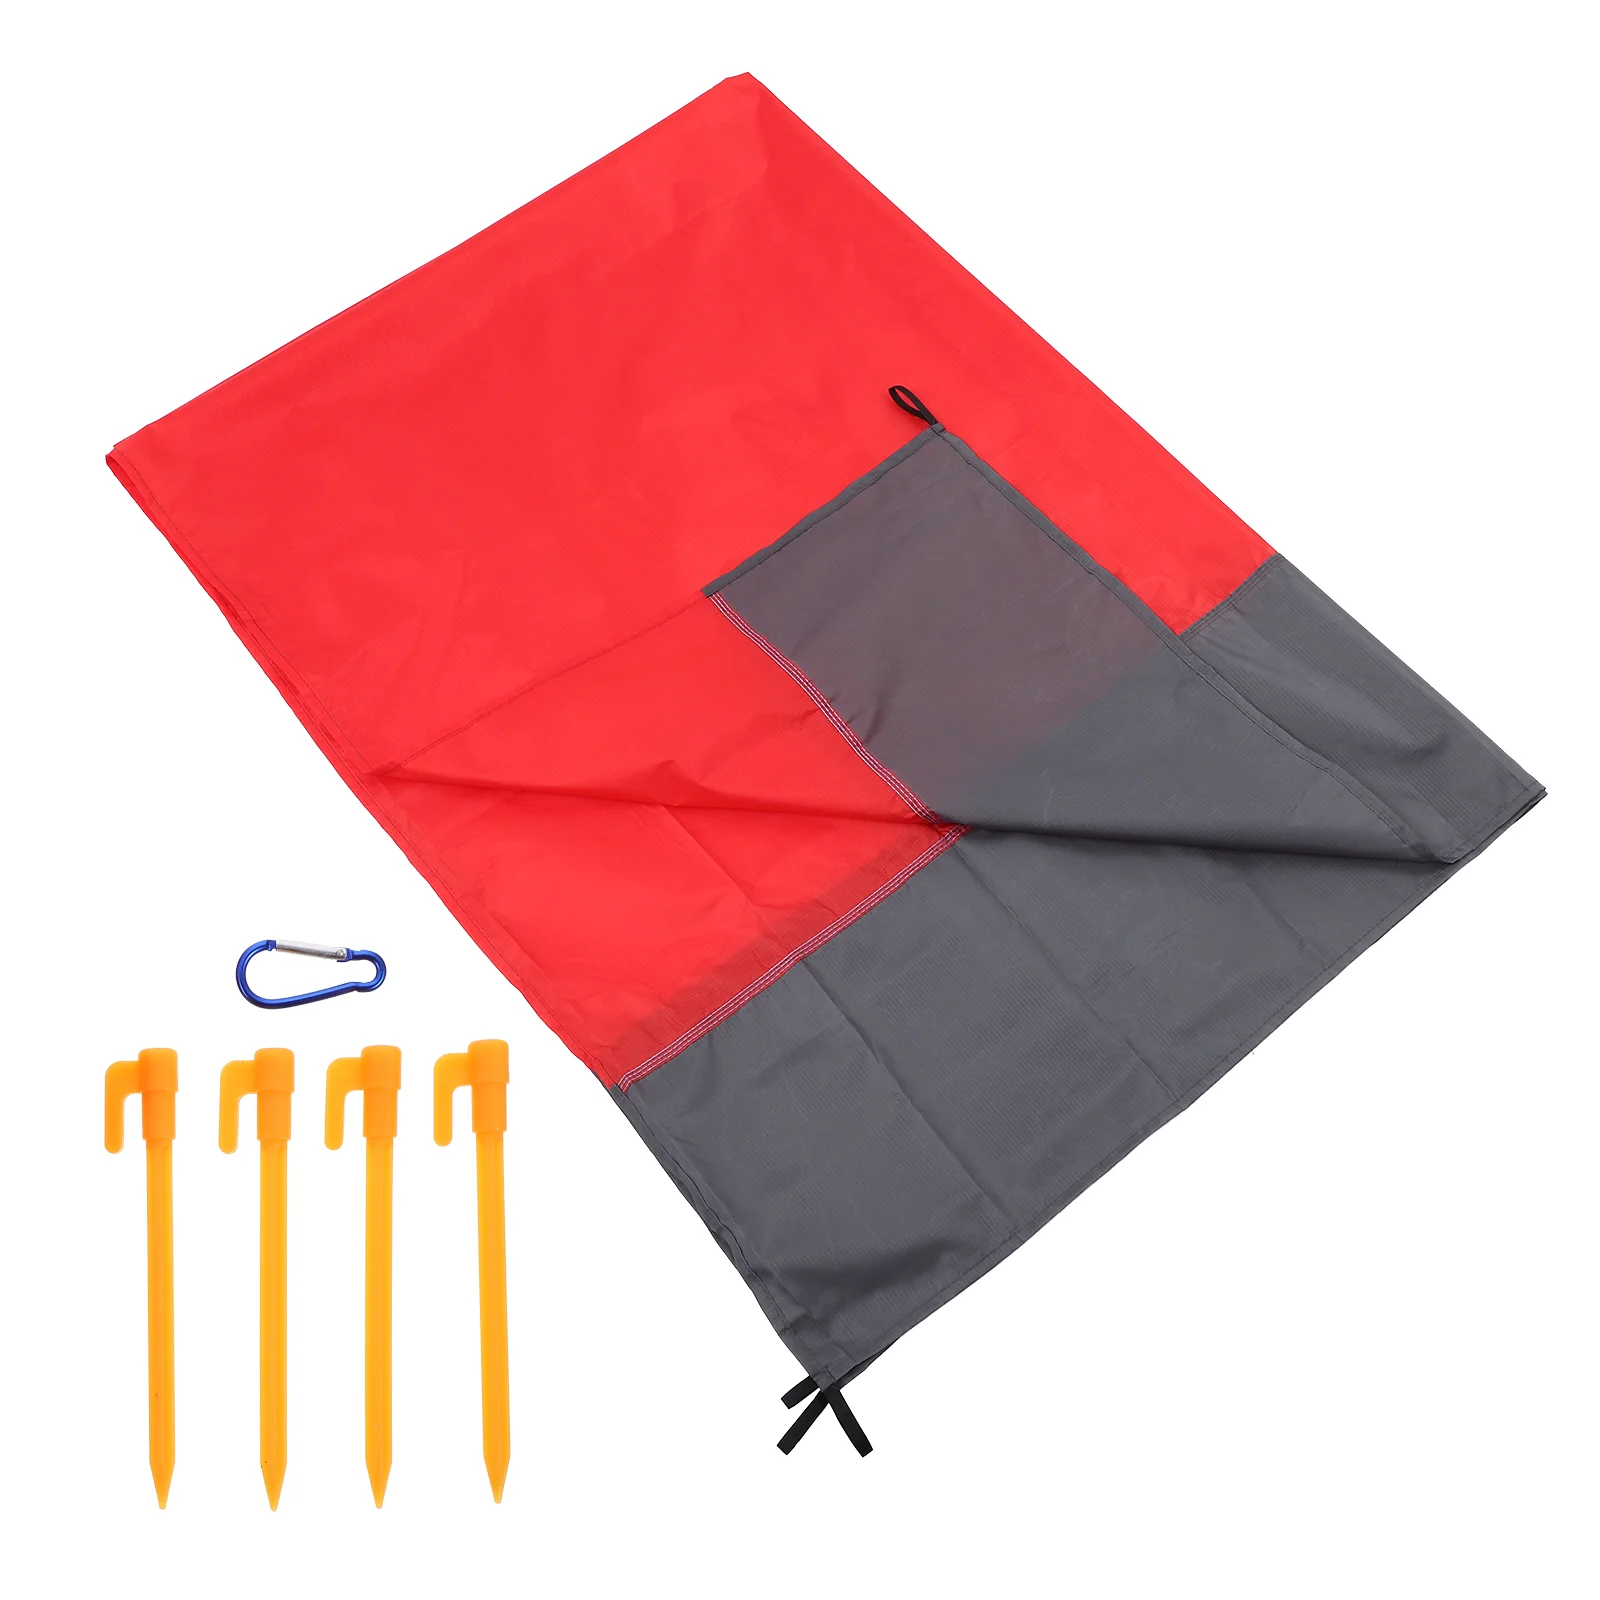 

Blanket Picnic Beach Foldable Mat Waterproof Sand Large Proof Sandless Compact Outdoor Camping Resist Wear Pocket Resistant